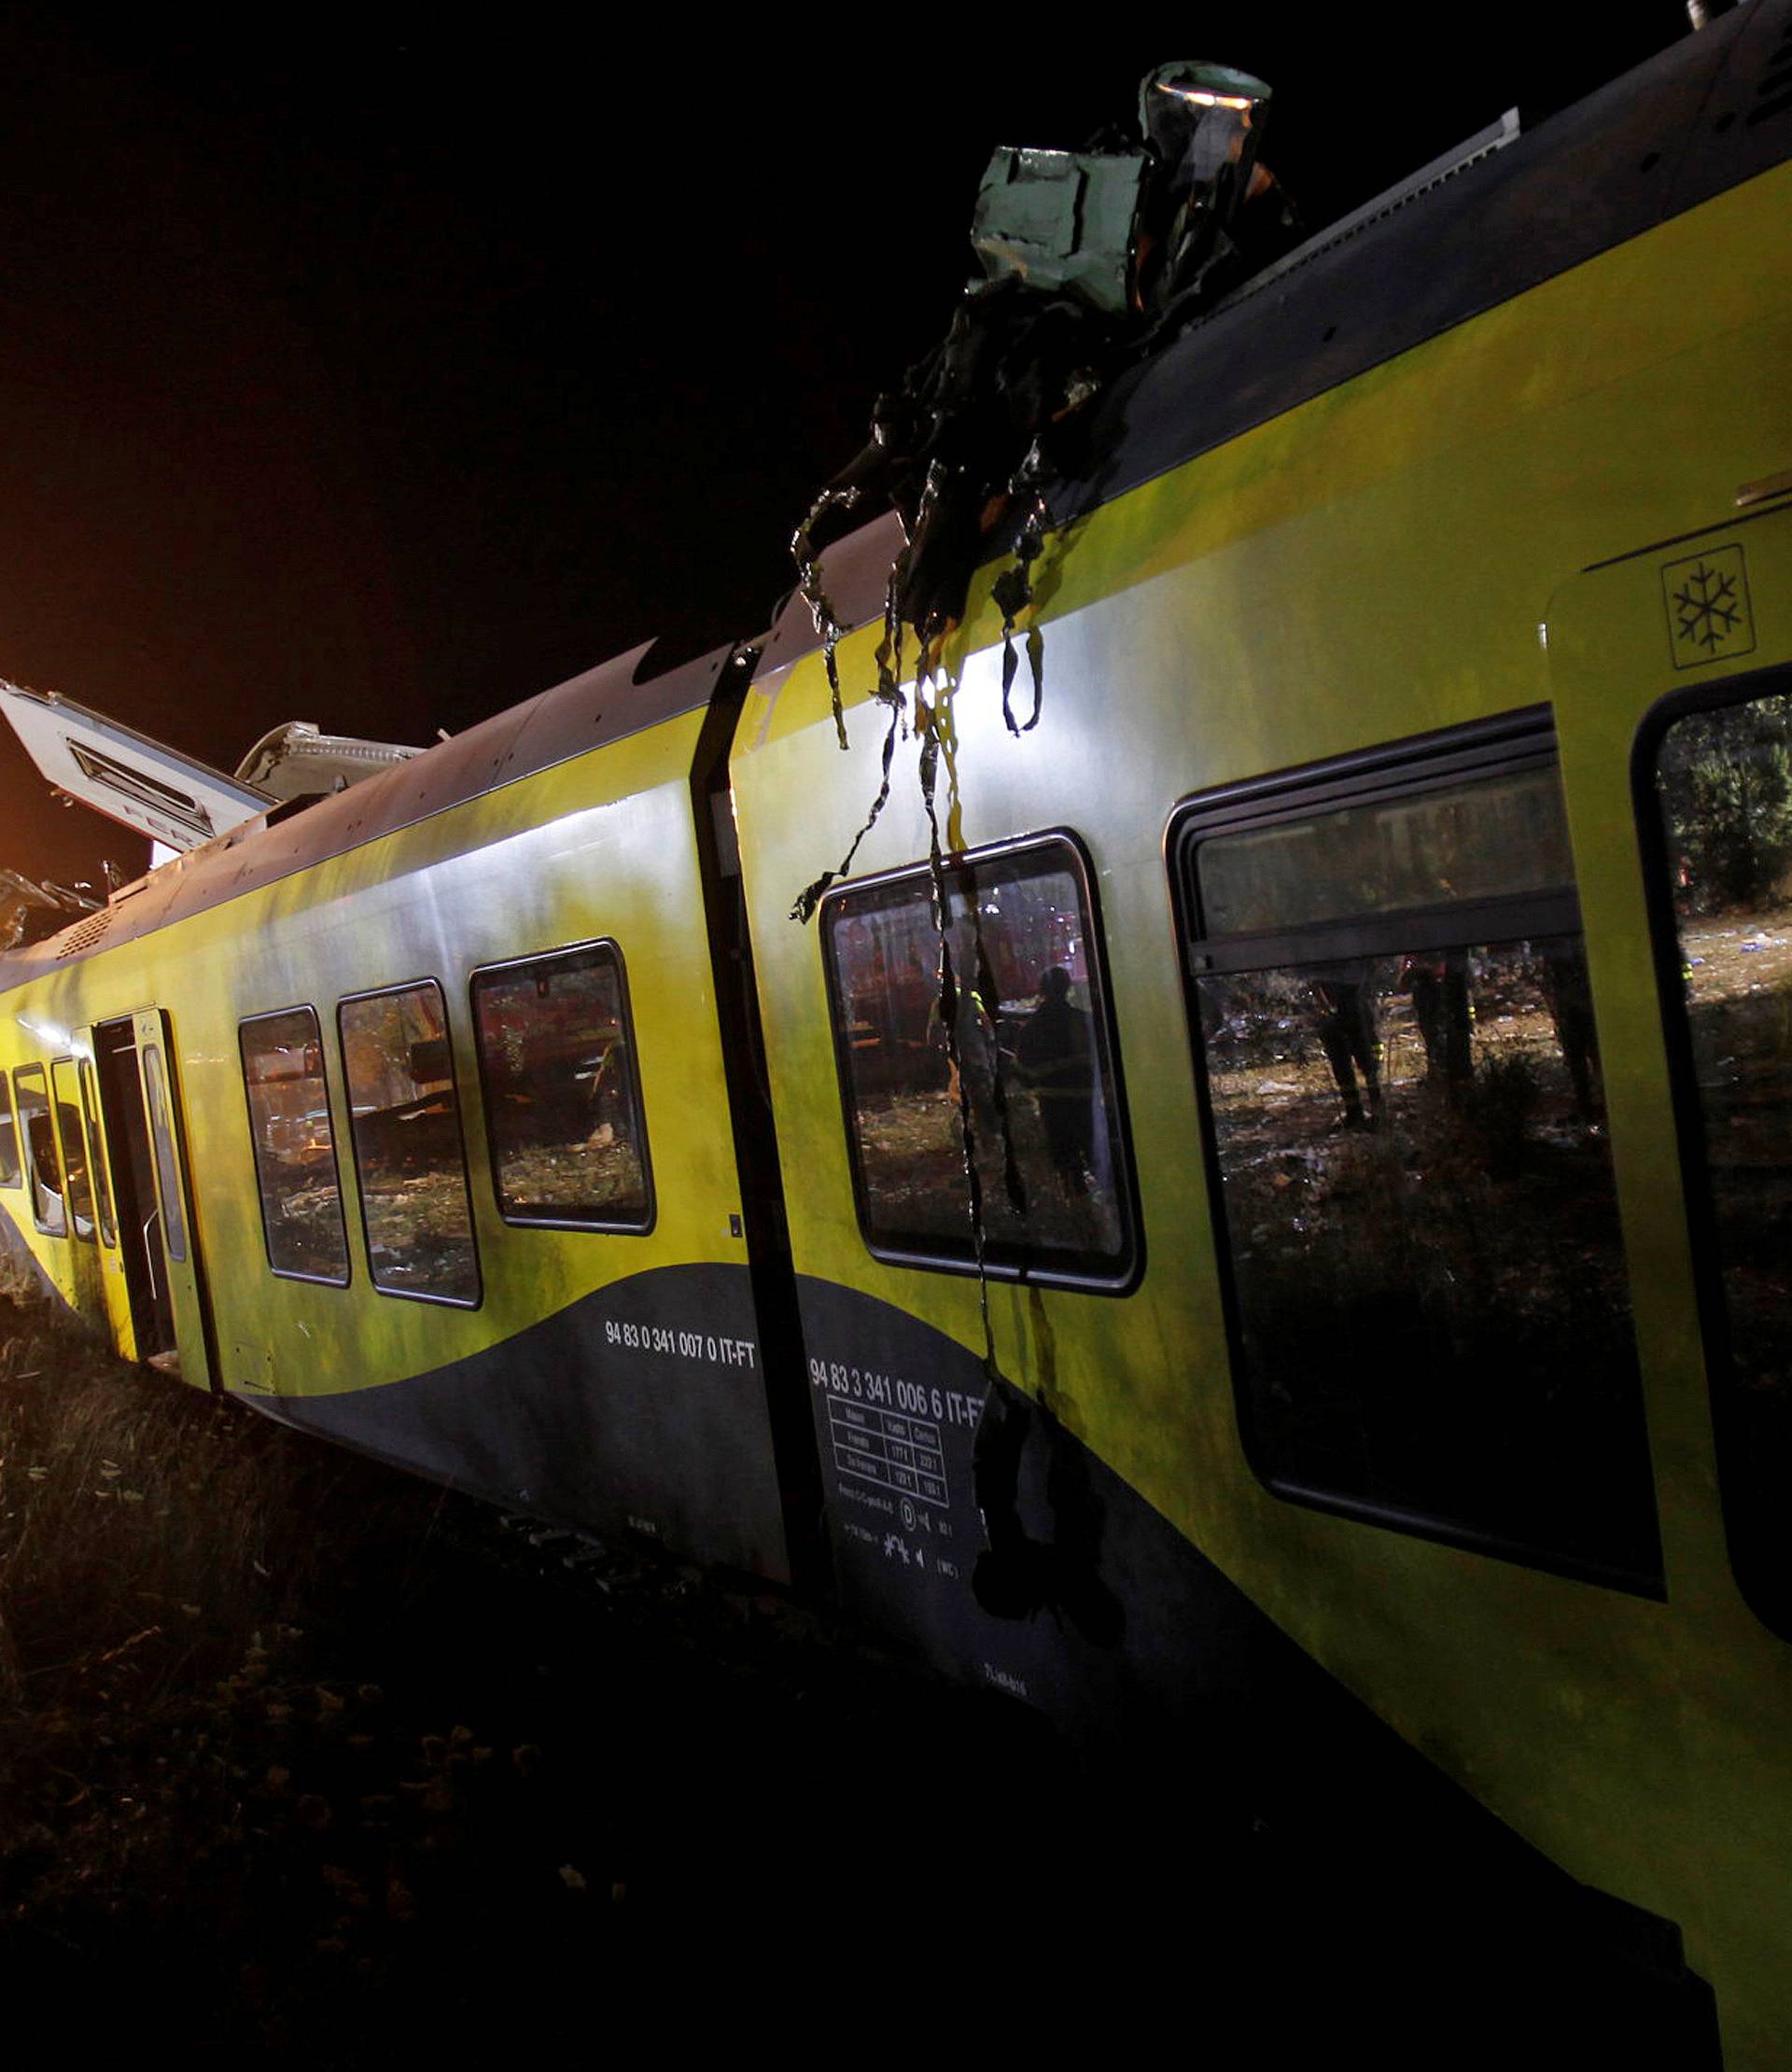 A rescuer works at the site where two passenger trains collided in the middle of an olive grove in the southern village of Corato